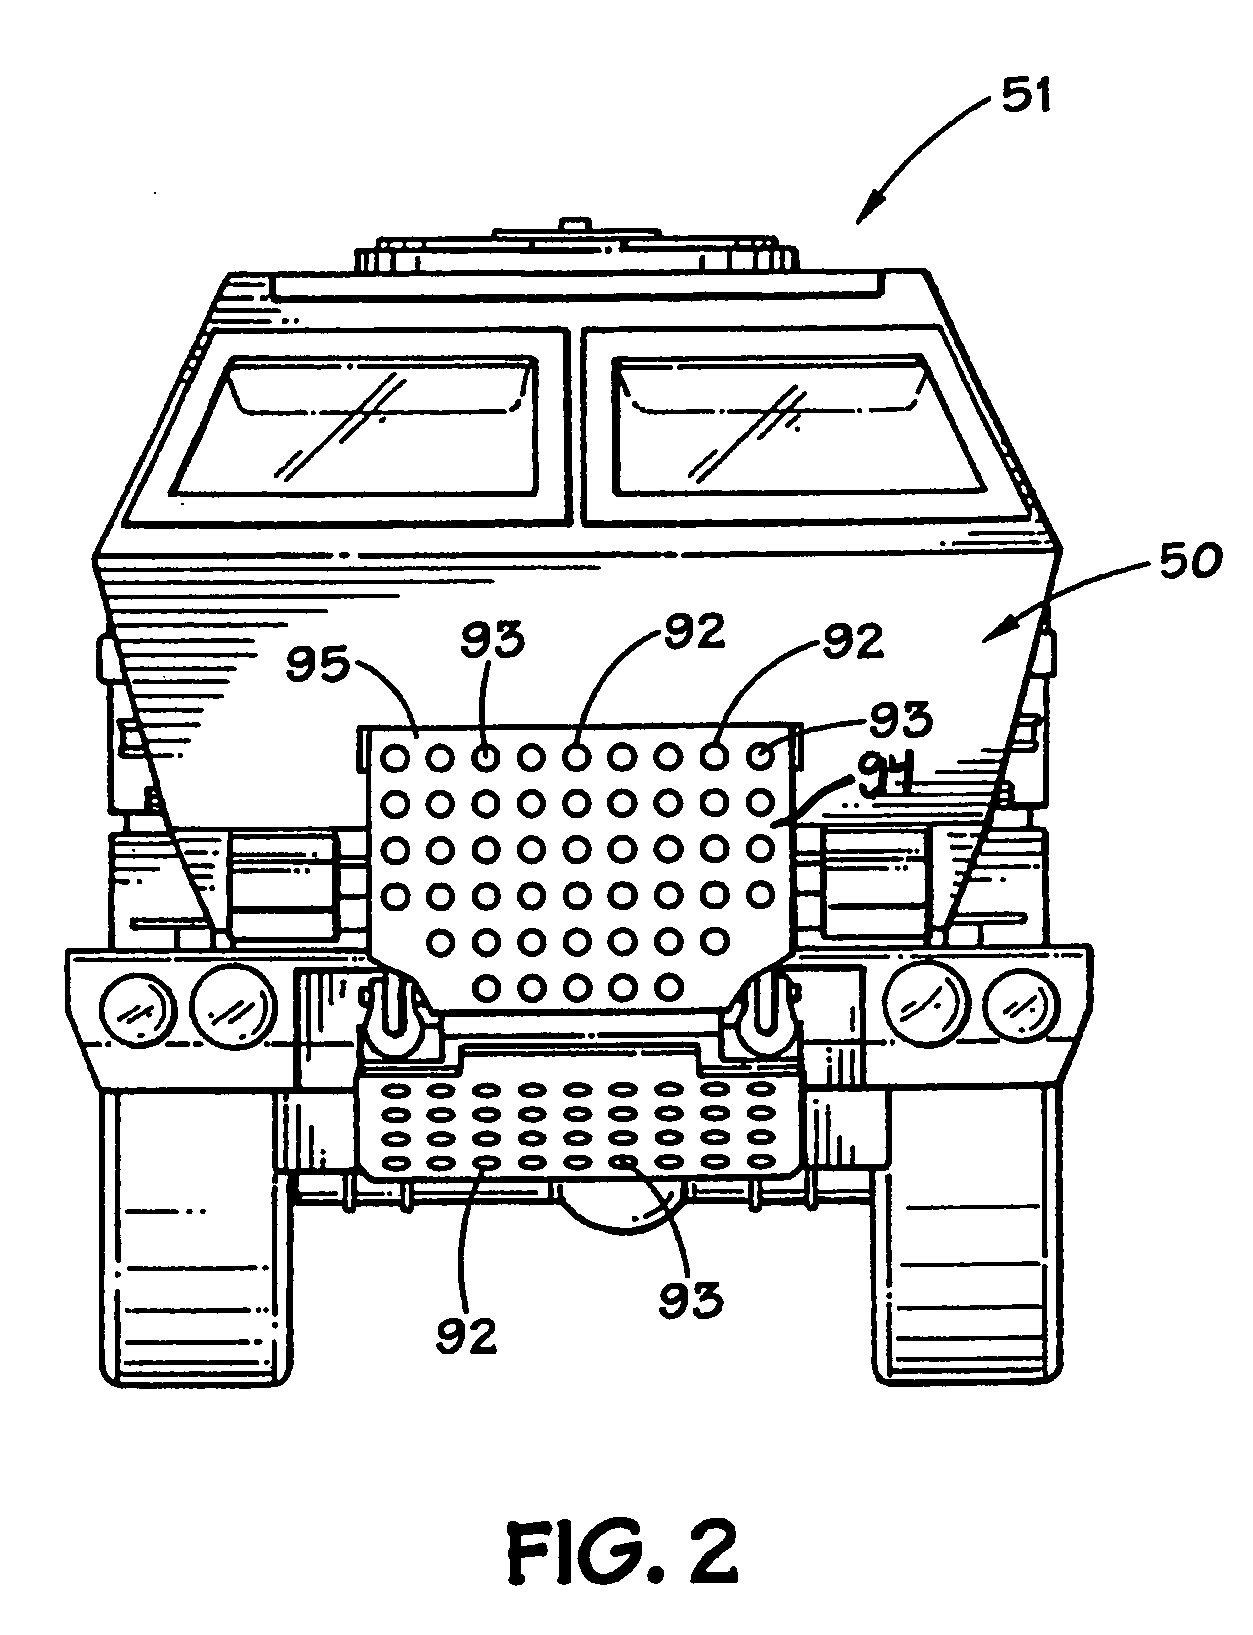 Armored cab for vehicles